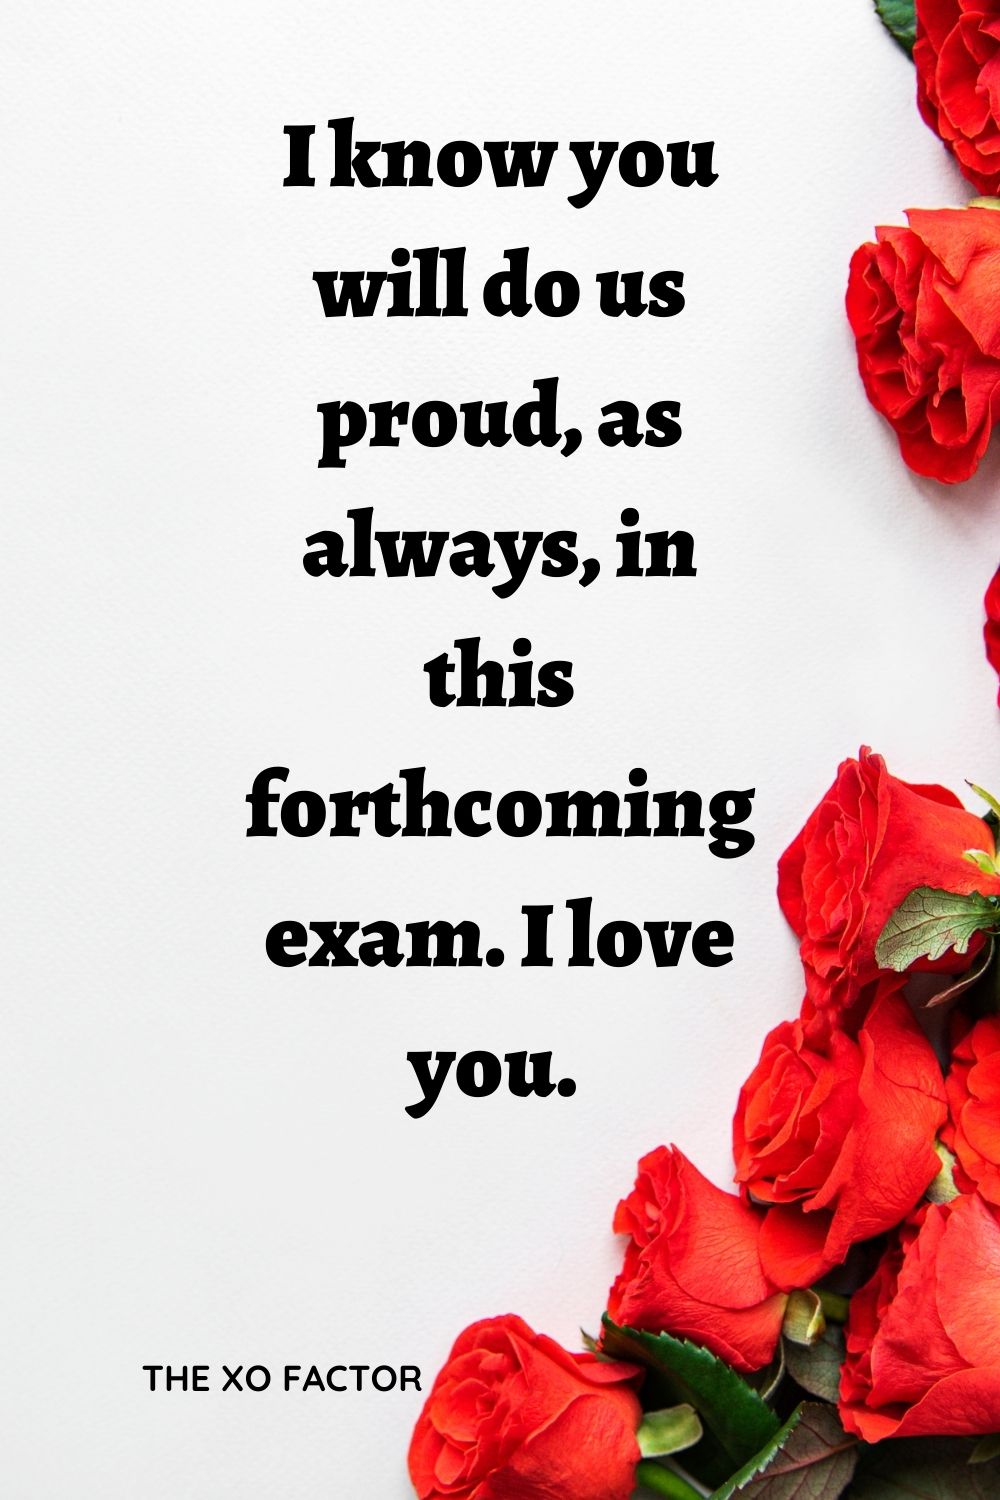 I know you will do us proud, as always, in this forthcoming exam. I love you. 